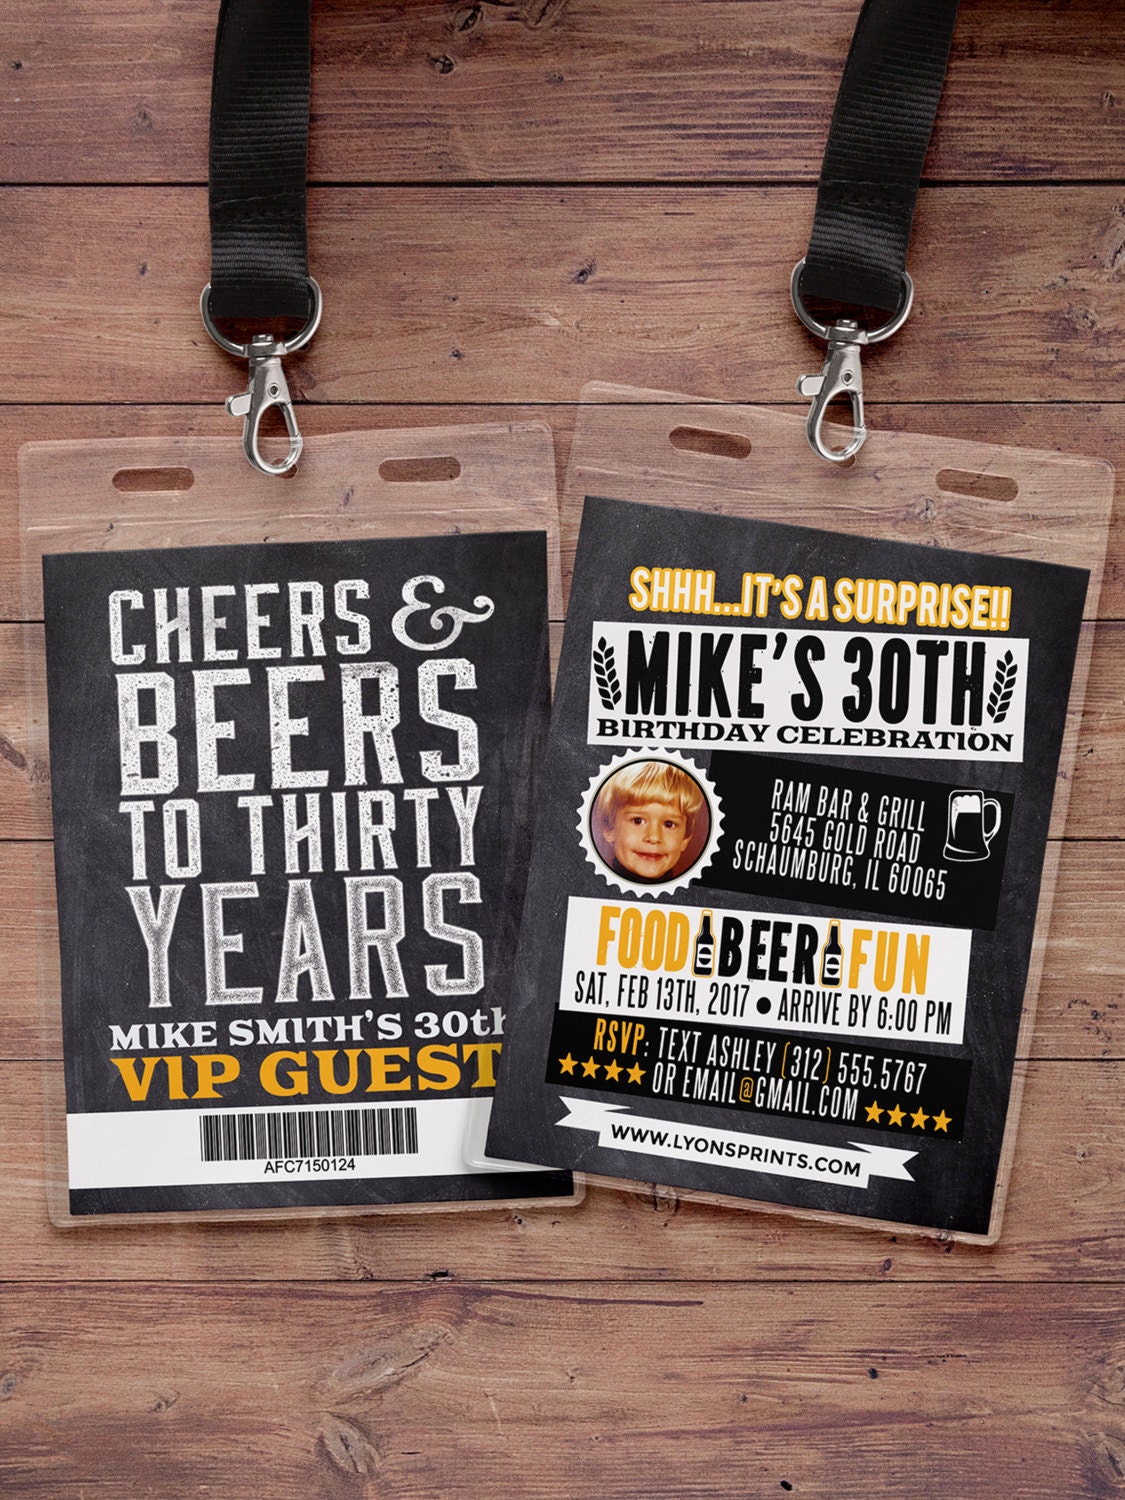 Any Age, Cheers & Beers Invitation, Beer, 21st, 30Th, 40Th, 50Th, 60Th, 70Th, Surprise Birthday Party Invitation, Vip Pass, Cheers